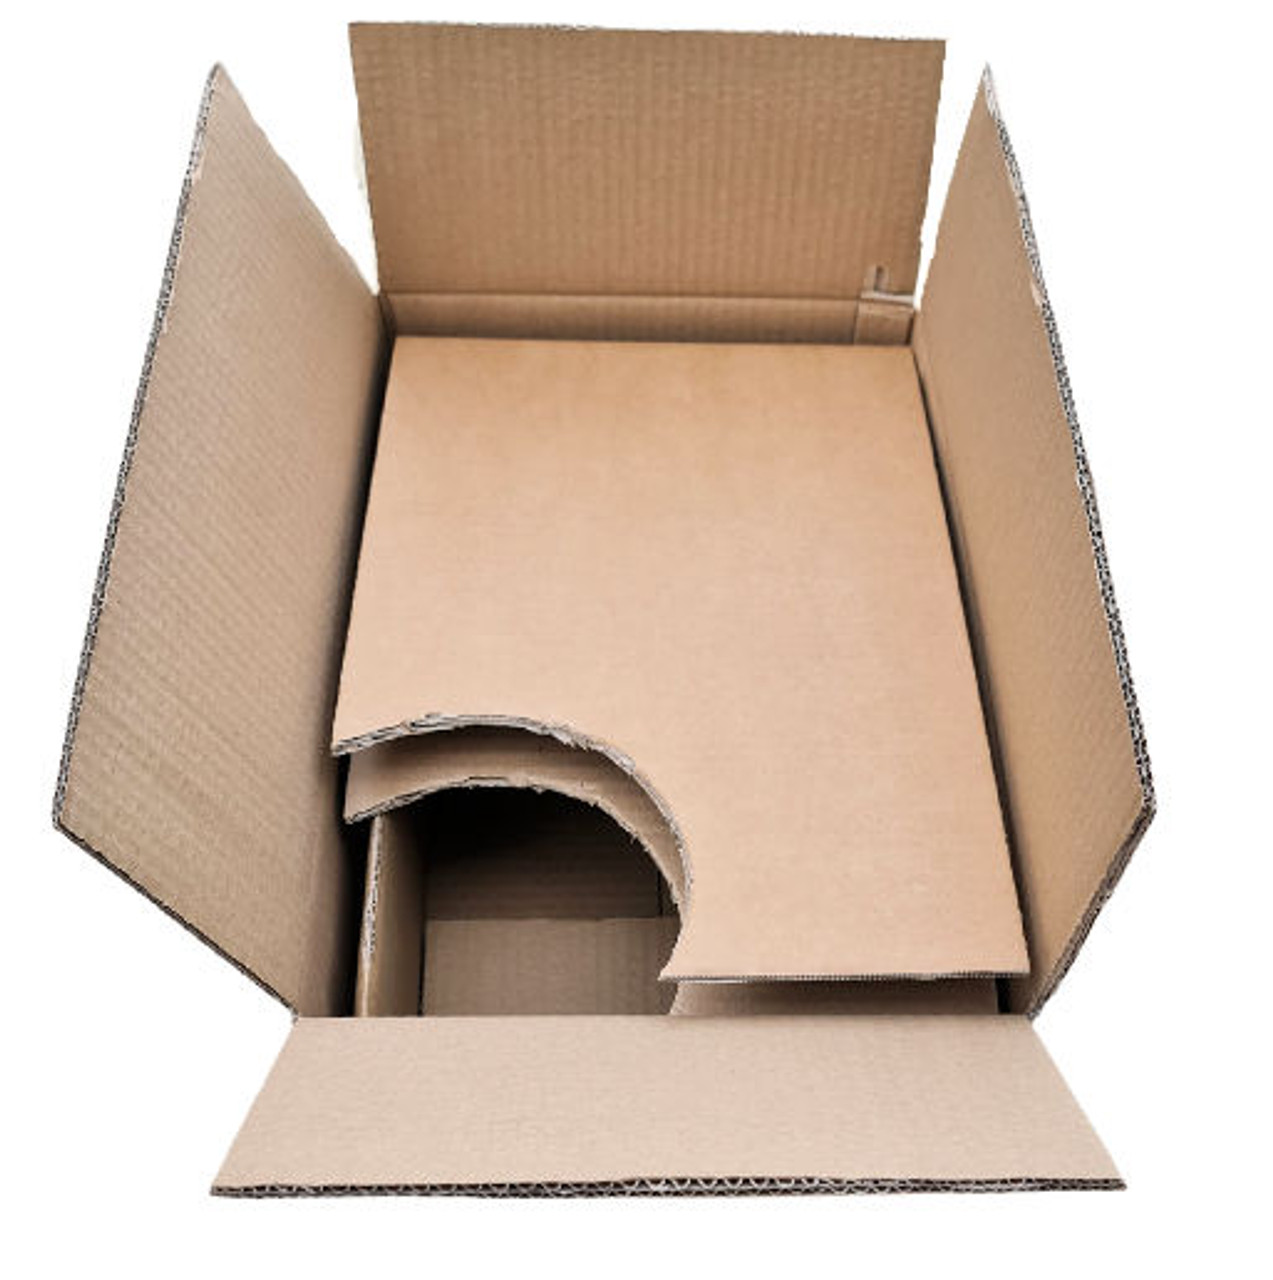 6klo Environmentally Friendly Insulated Cardboard Box ( pack x 15 )